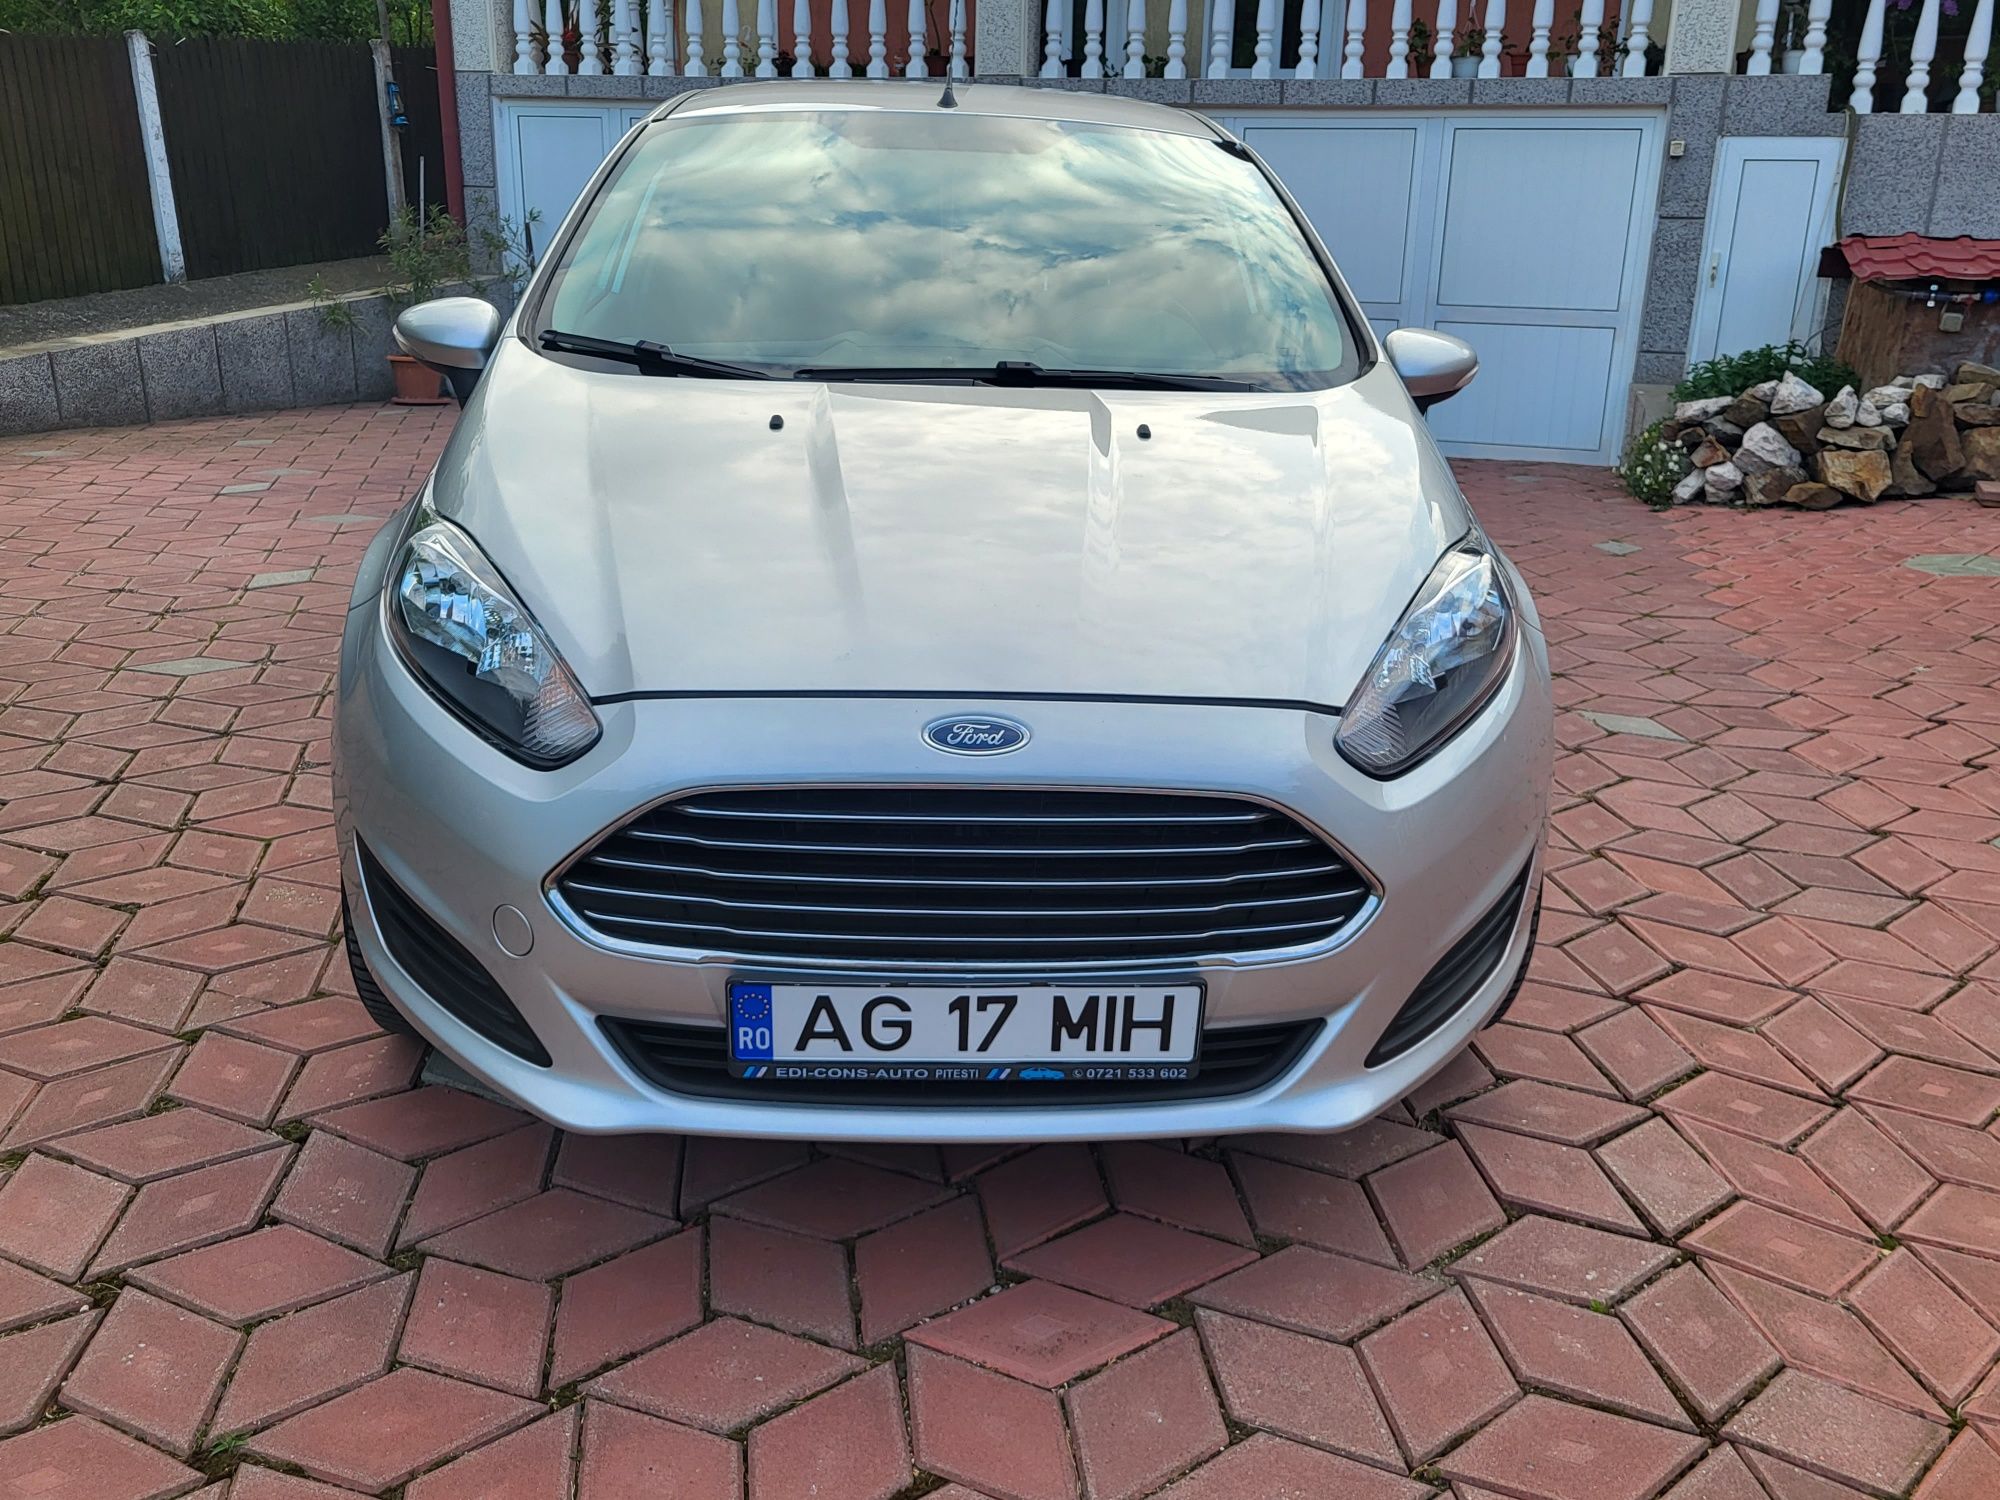 Ford Fiesta 1.5 tdci euro5 trend style